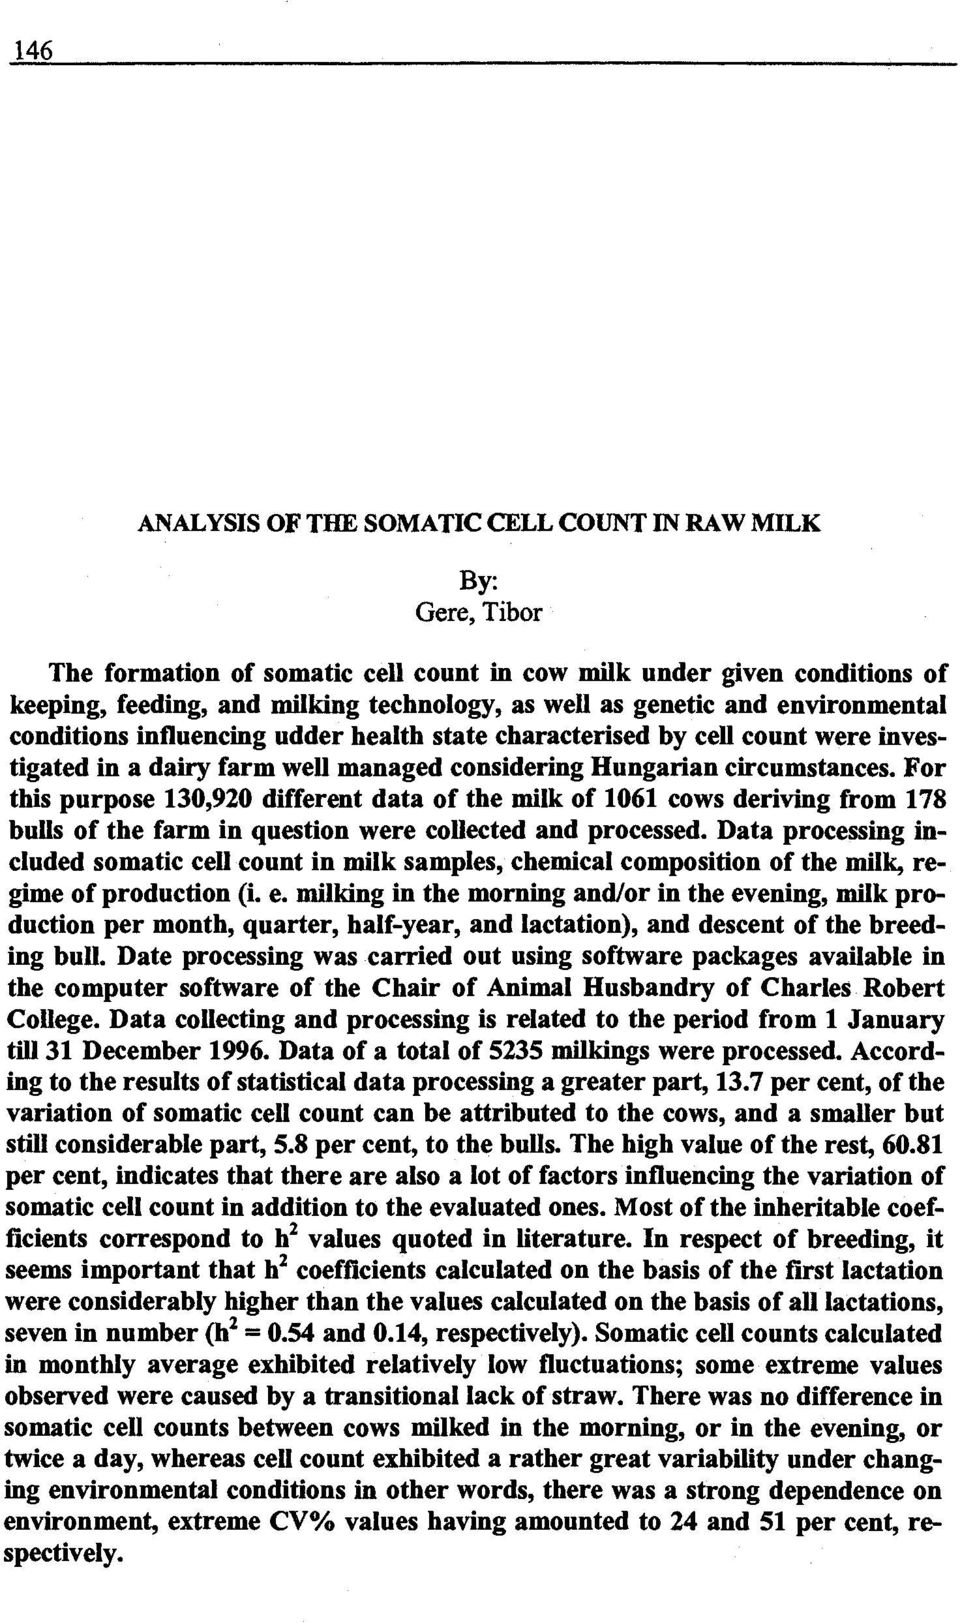 For this purpose 130,920 different data of the milk of 1061 cows deriving from 178 bulls of the farm in question were collected and processed.